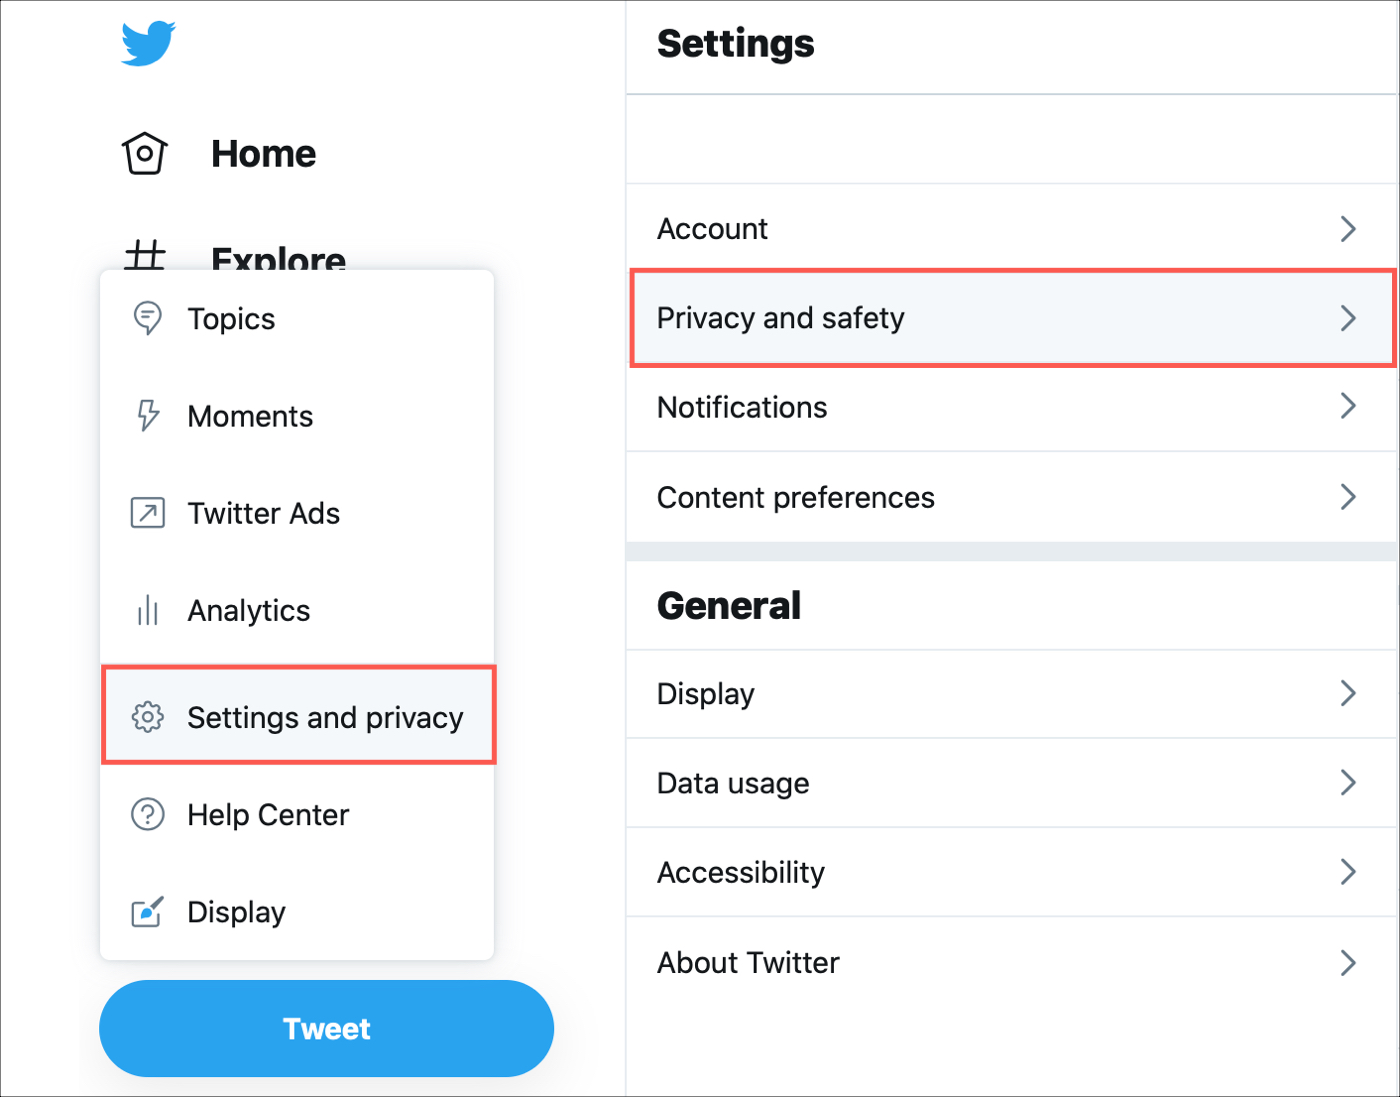 How to disable offensive content filtering for your Twitter news feed